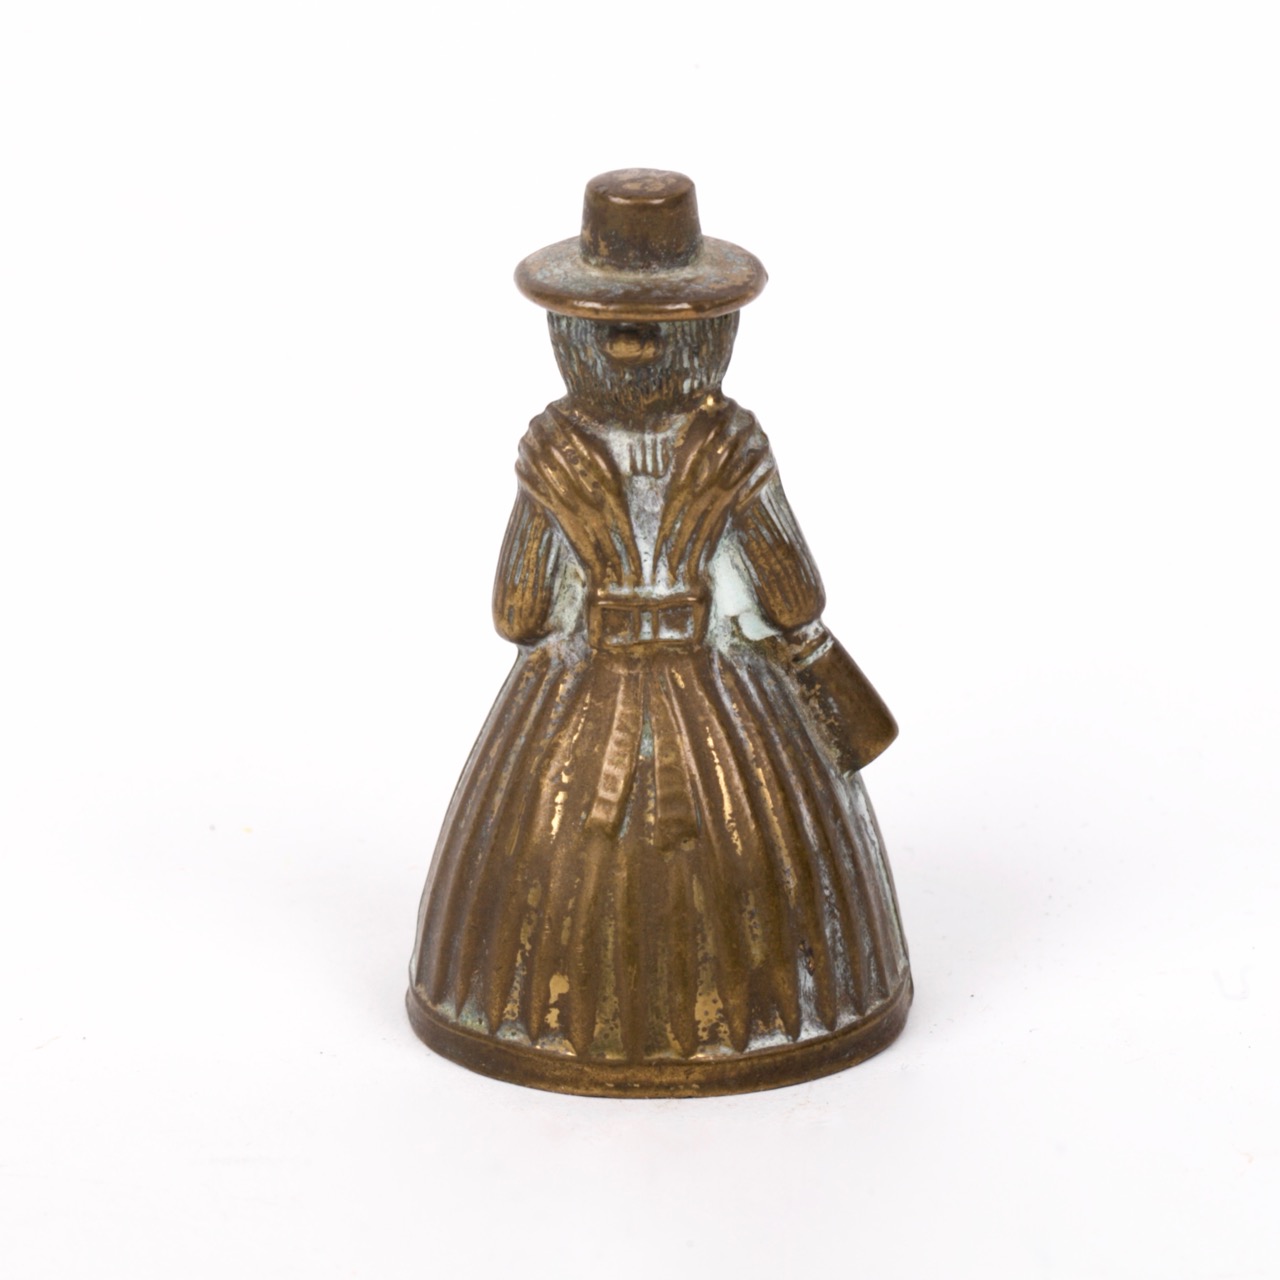 Antique brass bell in a shape of a woman - Antique weapons, collectibles,  silver, icons, bronze, swords, daggers..